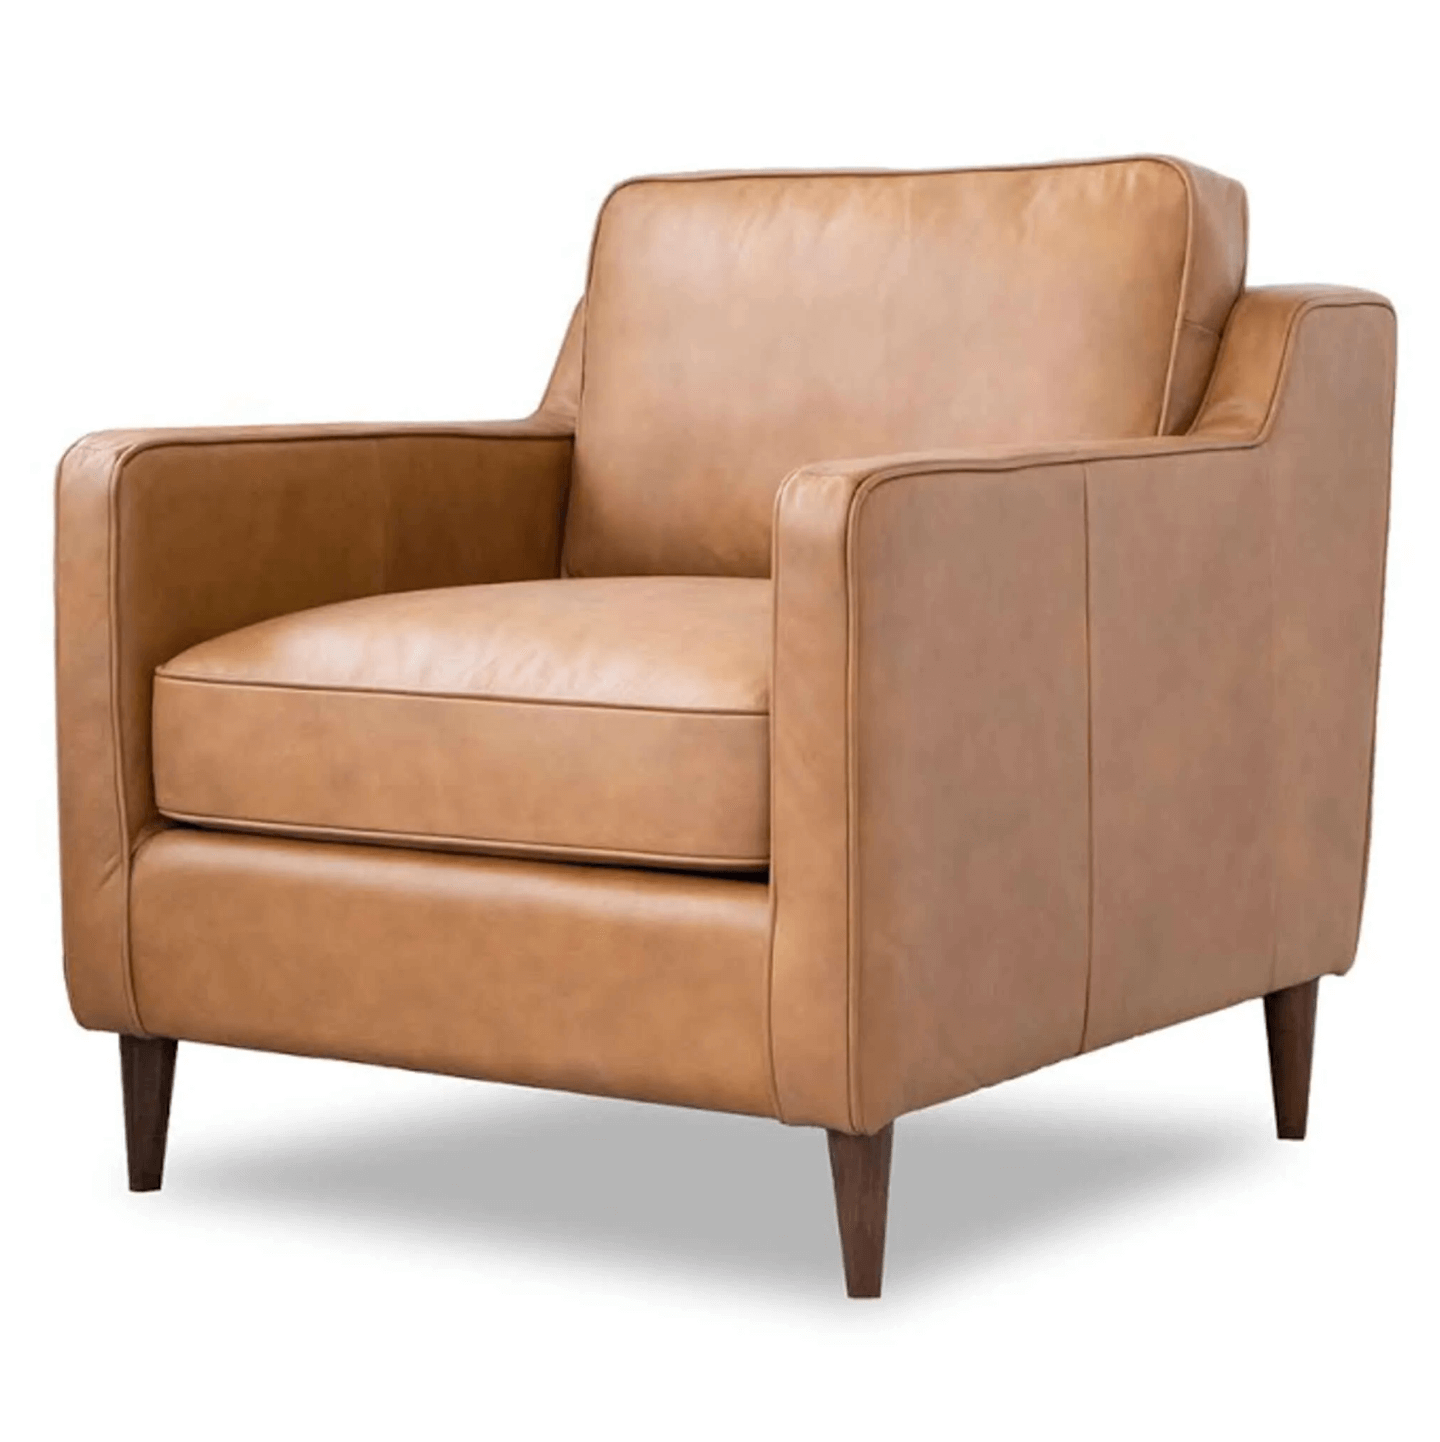 Cooper MCM Tan Leather Lounge Chair